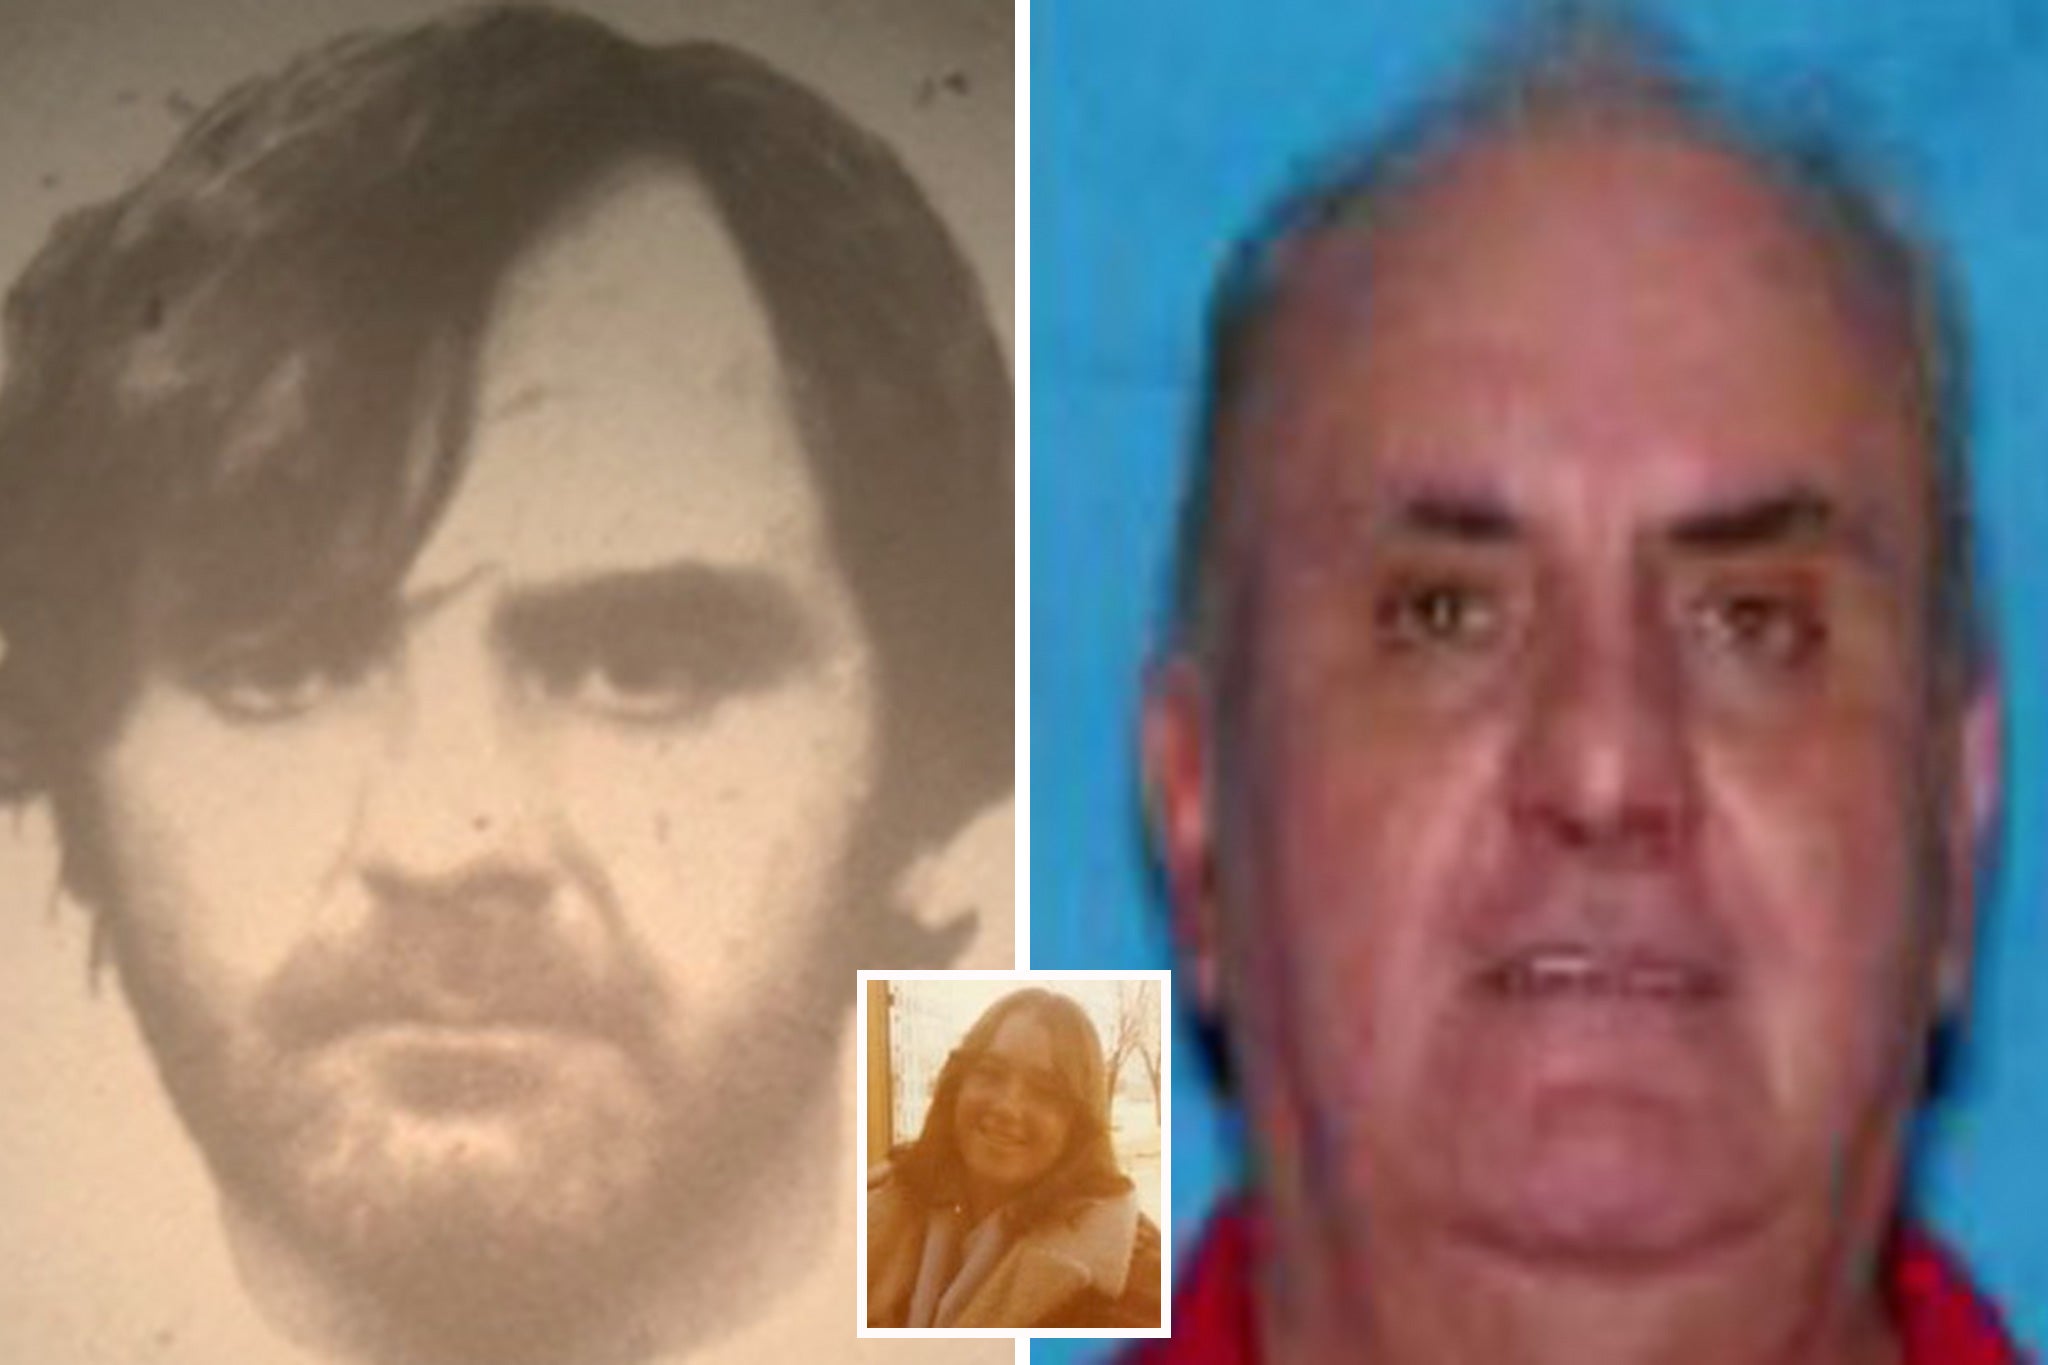 New DNA evidence pointing to William C. Kernan Jr (circa 1977 and before his death in 2010) has help solve the cold case murder of Maria Loraine Honzell (inset)